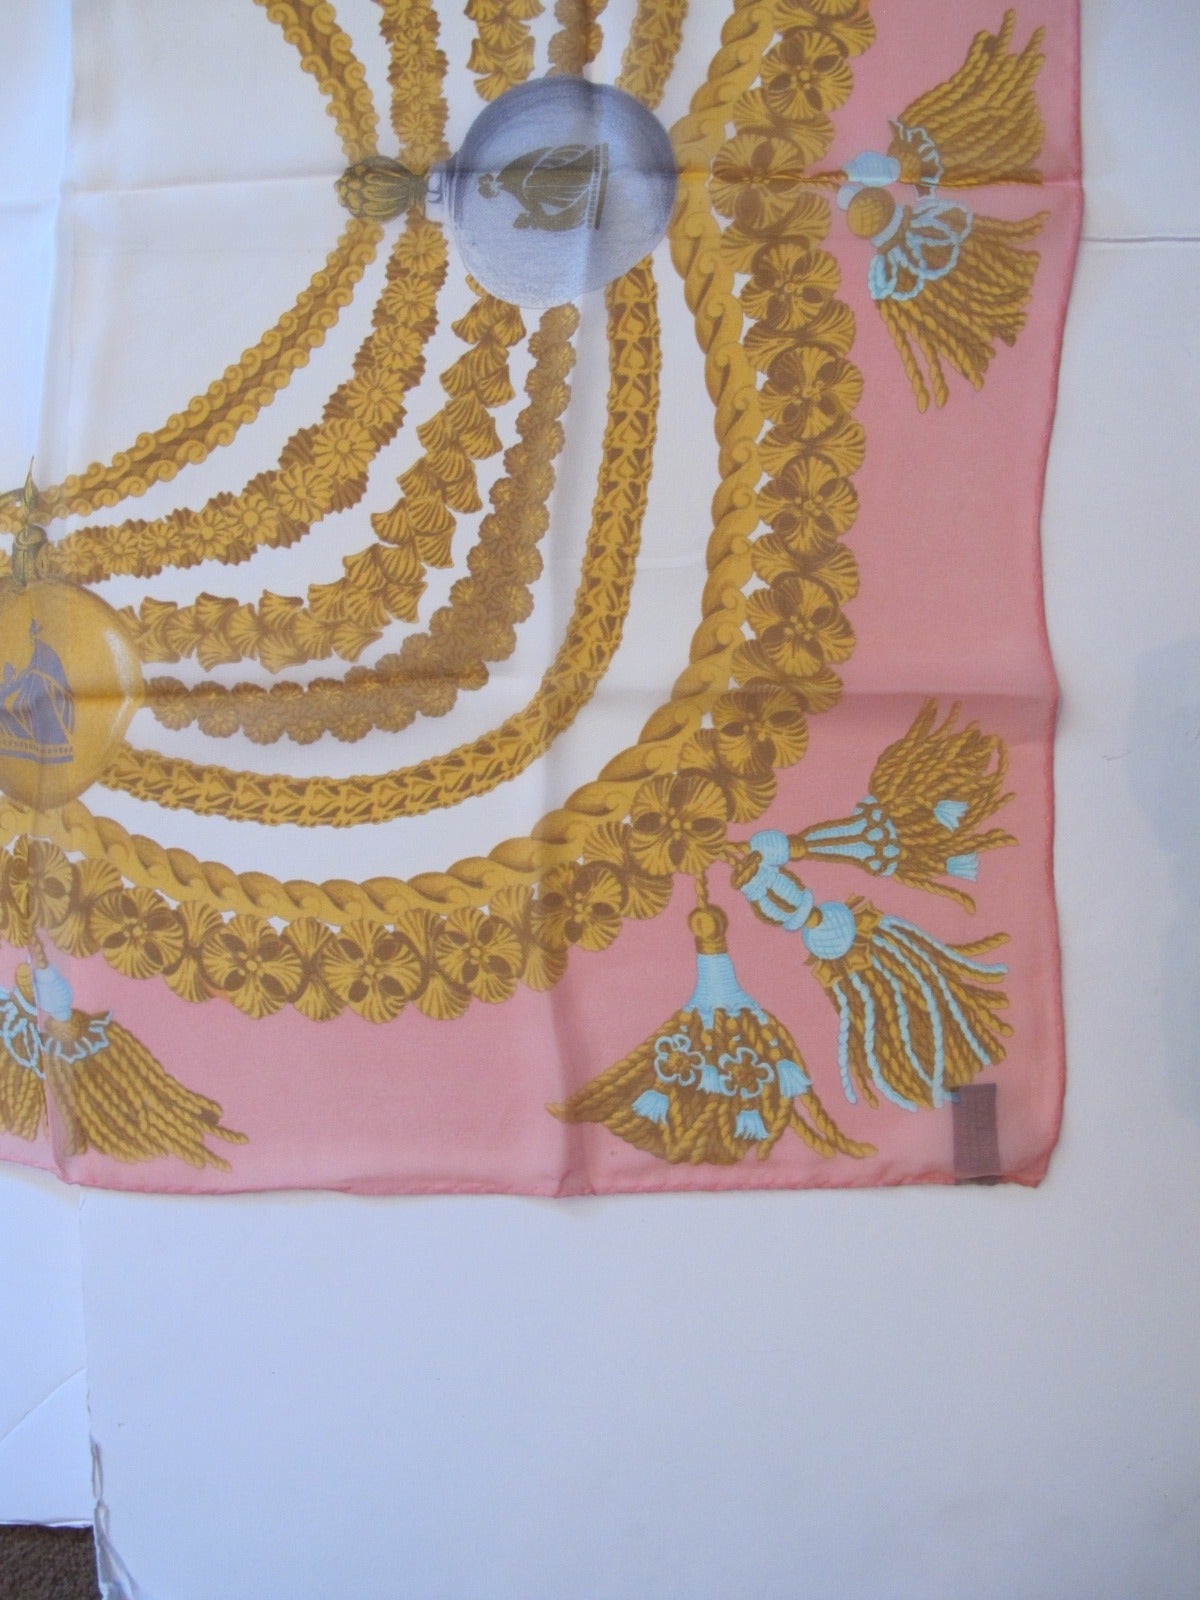 Women's 1960's Vintage Lanvin Scarf with Perfume Bottles and Tassels For Sale